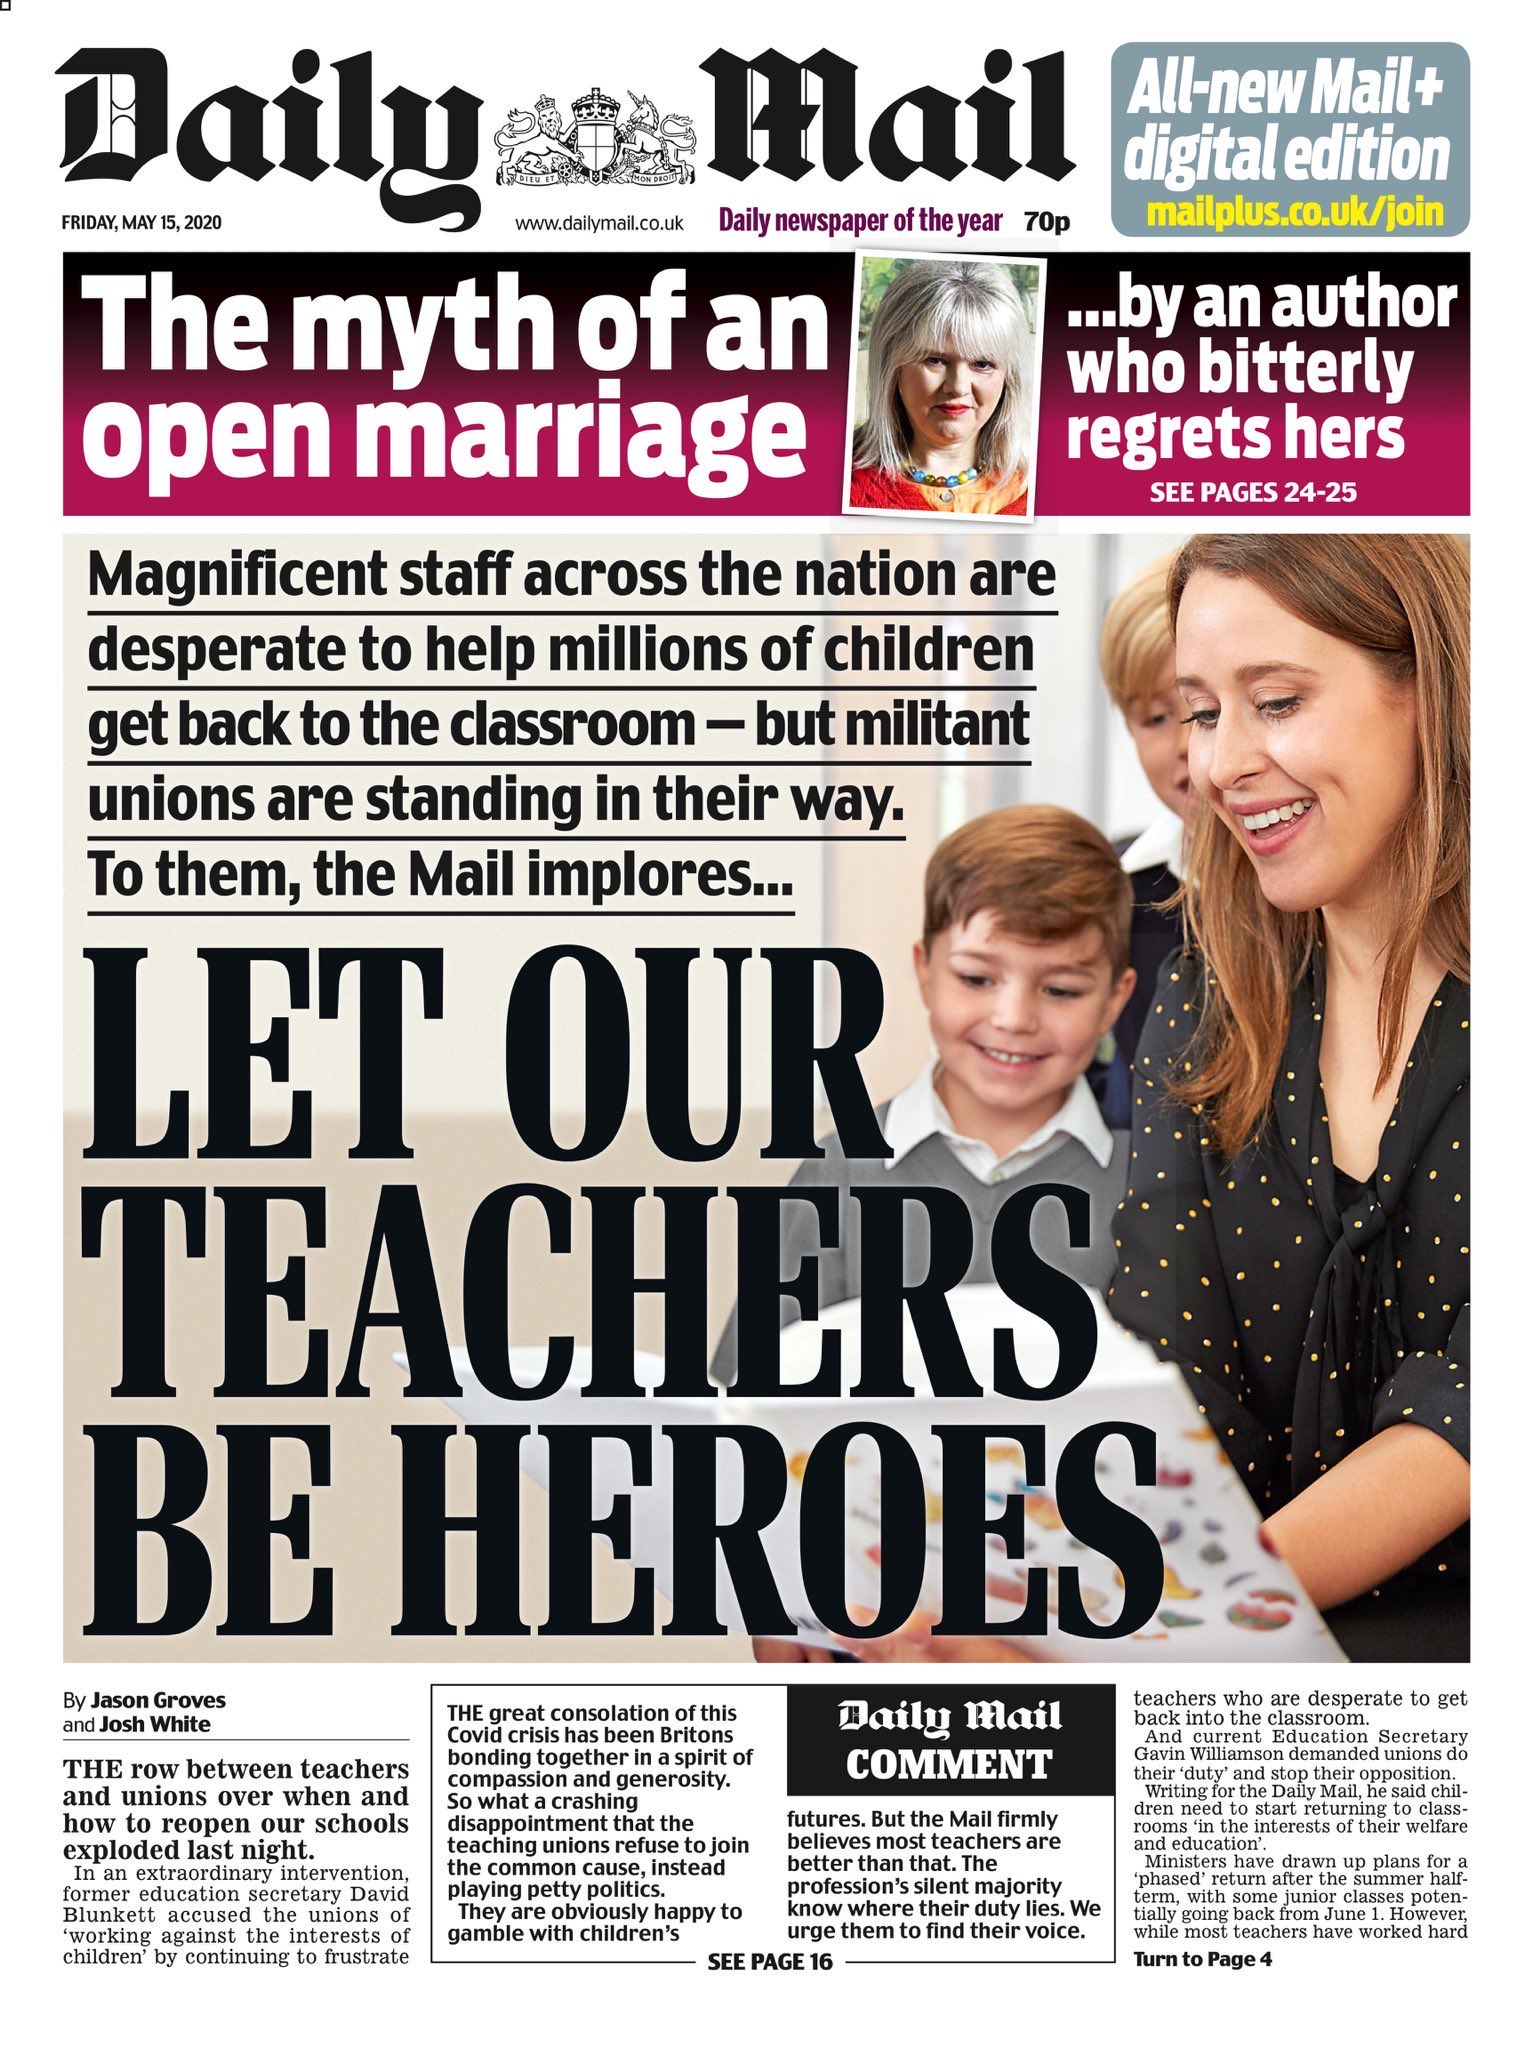 The Daily Mail front page on Friday, May 15, with the headline: 'Let Our Teachers Be Heroes'